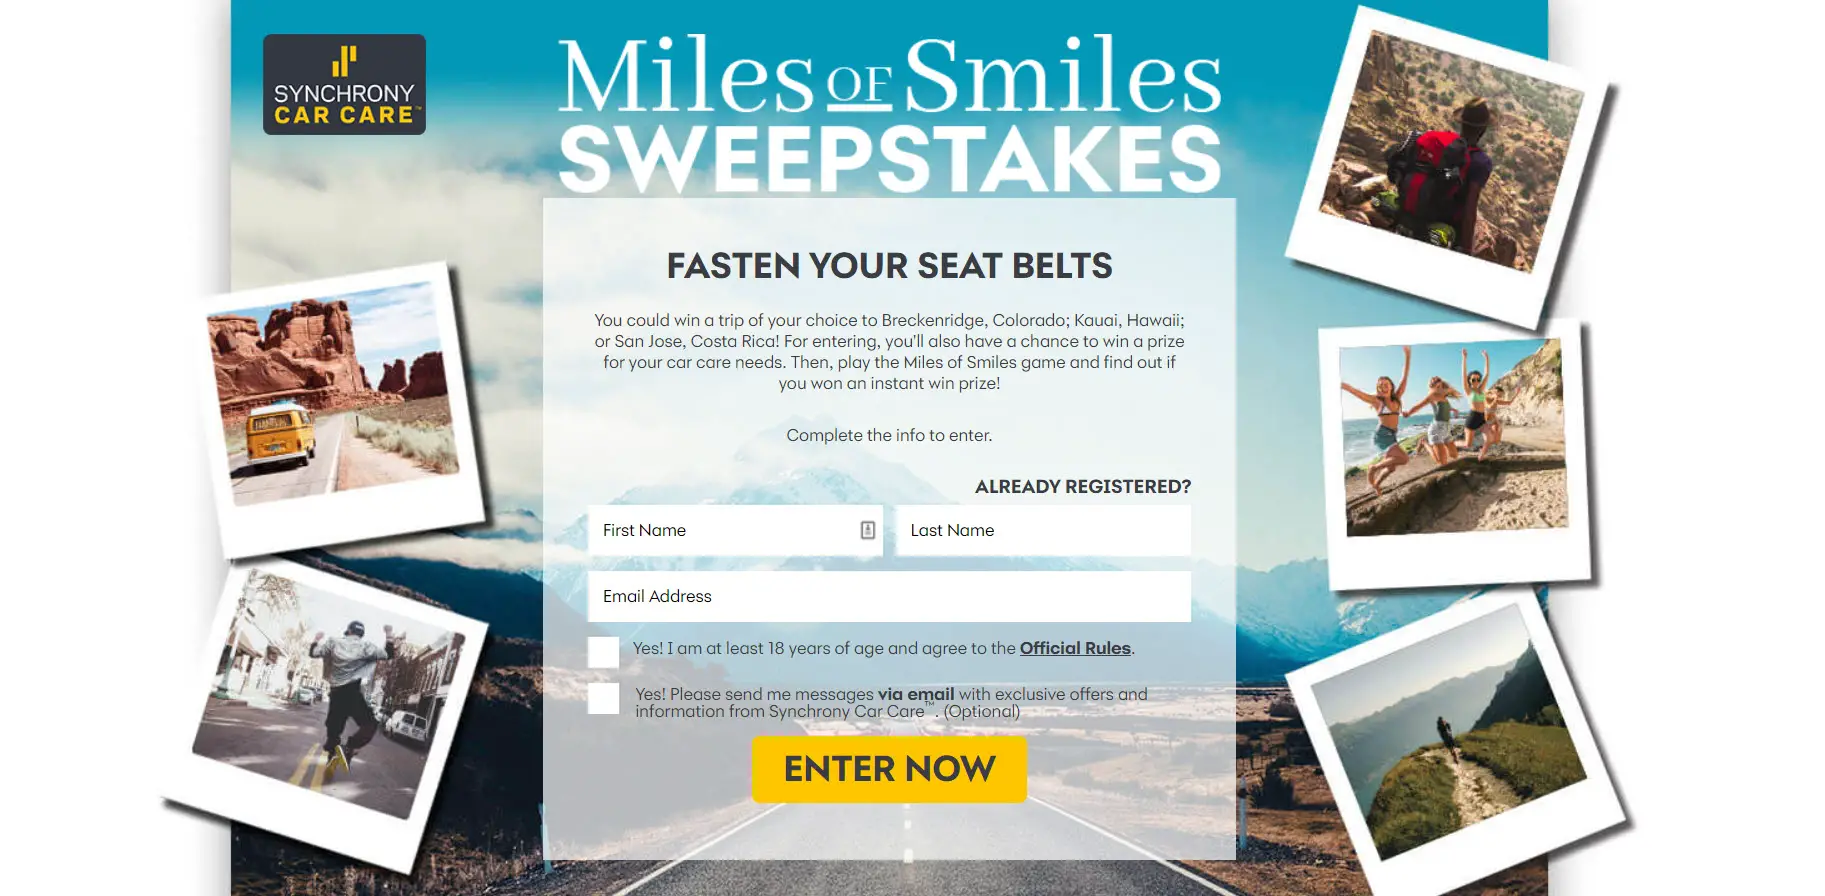 641 PRIZE! Play the Miles of Smiles Instant Win Game and you could win a trip of your choice to Breckenridge, Colorado; Kauai, Hawaii; or San Jose, Costa Rica! For entering, you'll also have a chance to win a prize for your car care needs. Then, play the Miles of Smiles game and find out if you won an instant win prize!